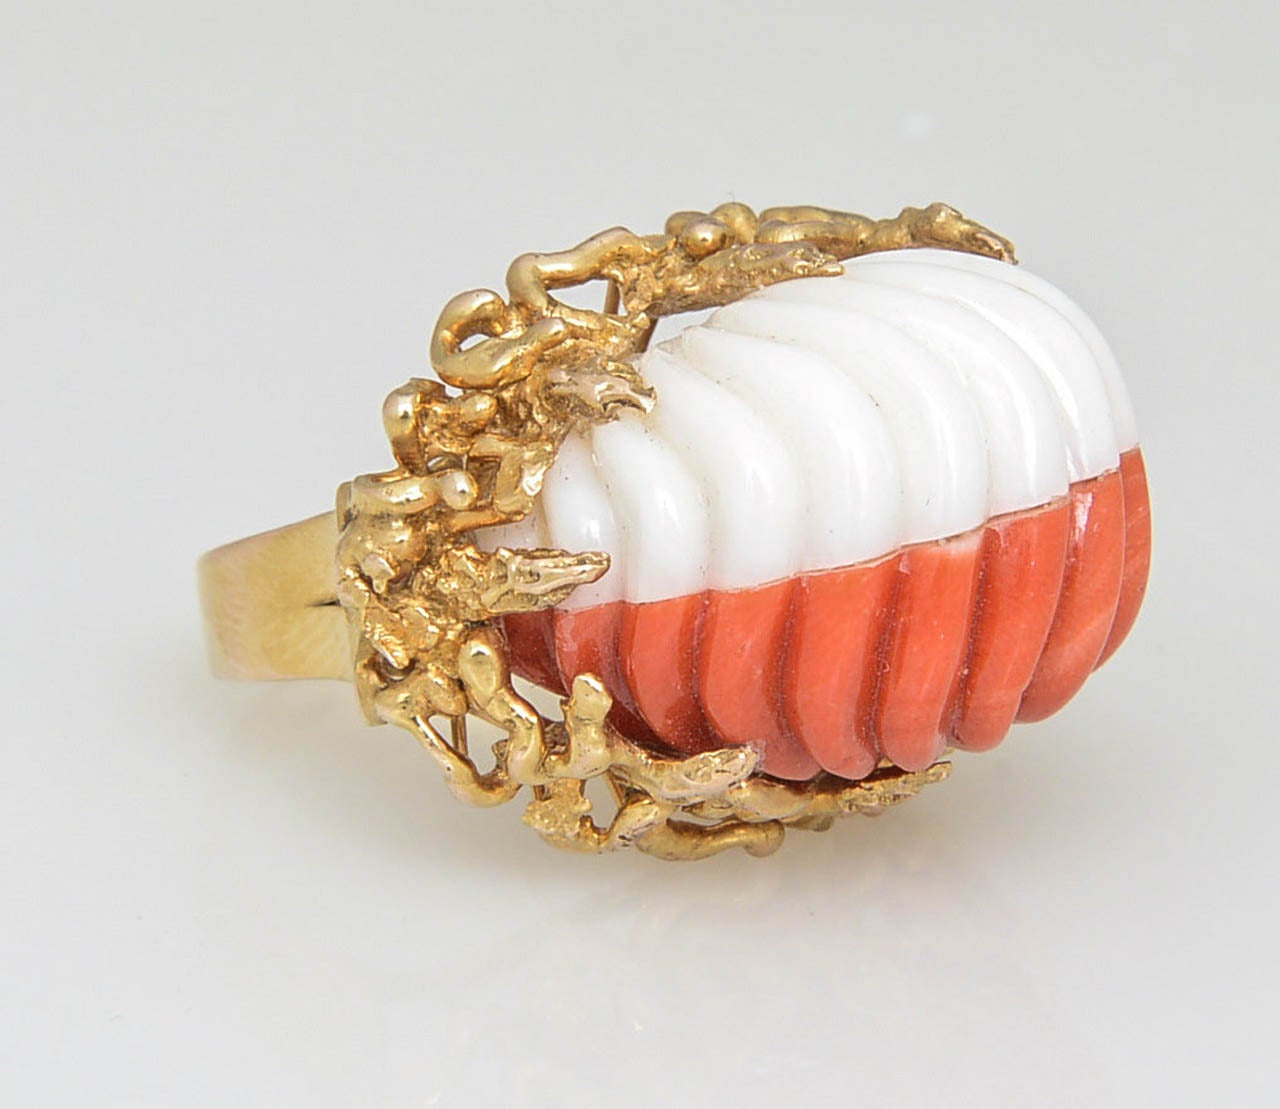 Striking 1960s ring featuring a two tone white and orange ribbed coral set in a 14k yellow gold brutalist bark and shiny finish mount.

US Size 7 which can be sized.